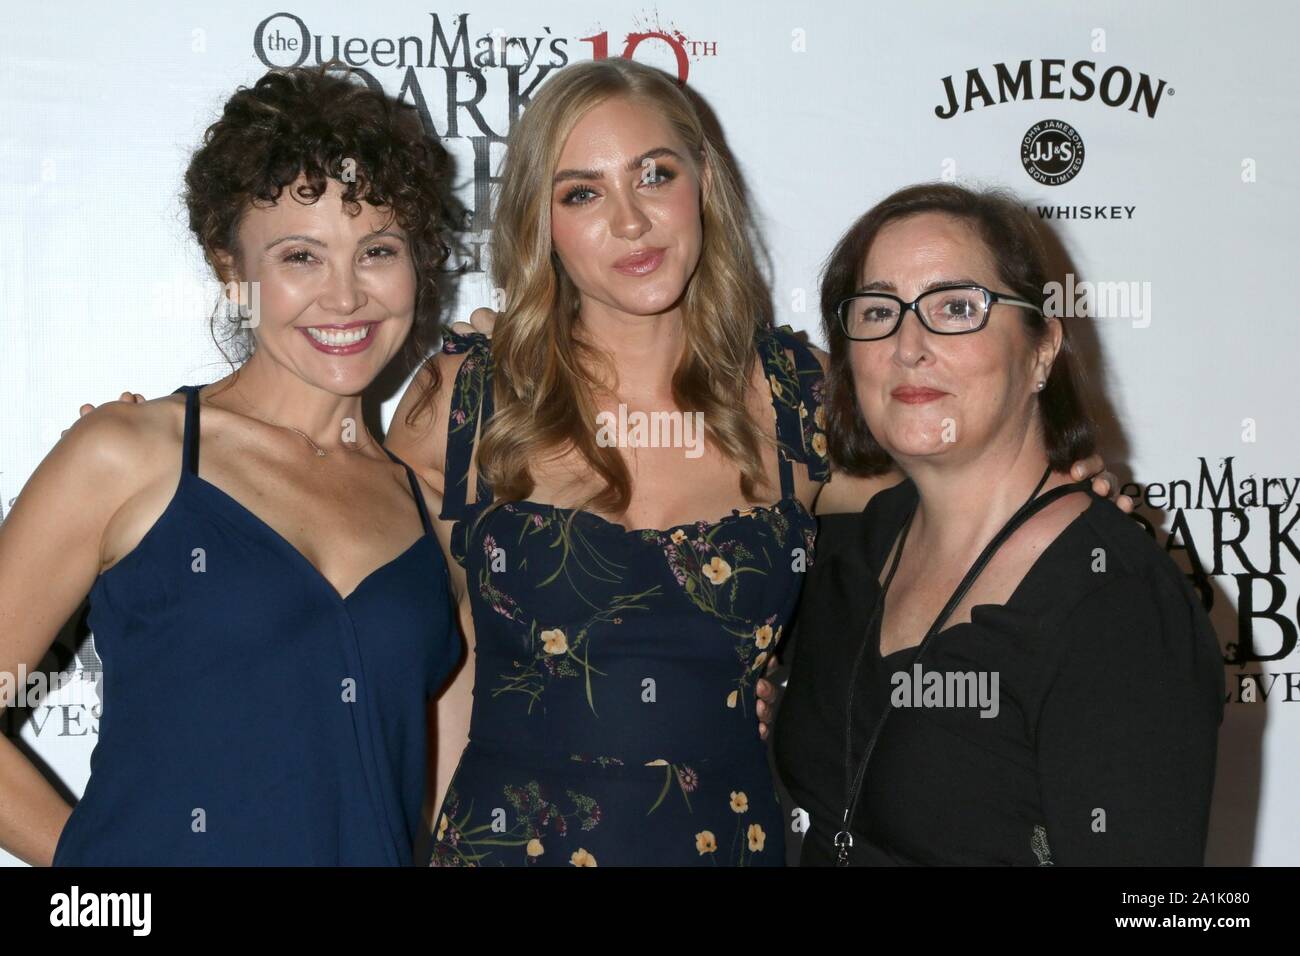 Long Beach, CA. 26th Sep, 2019. Reiko Aylesworth, Jessica Sipos, Jillian Armenante at arrivals for Catalina Film Festival - THU, RMS Queen Mary, Long Beach, CA September 26, 2019. Credit: Priscilla Grant/Everett Collection/Alamy Live News Stock Photo